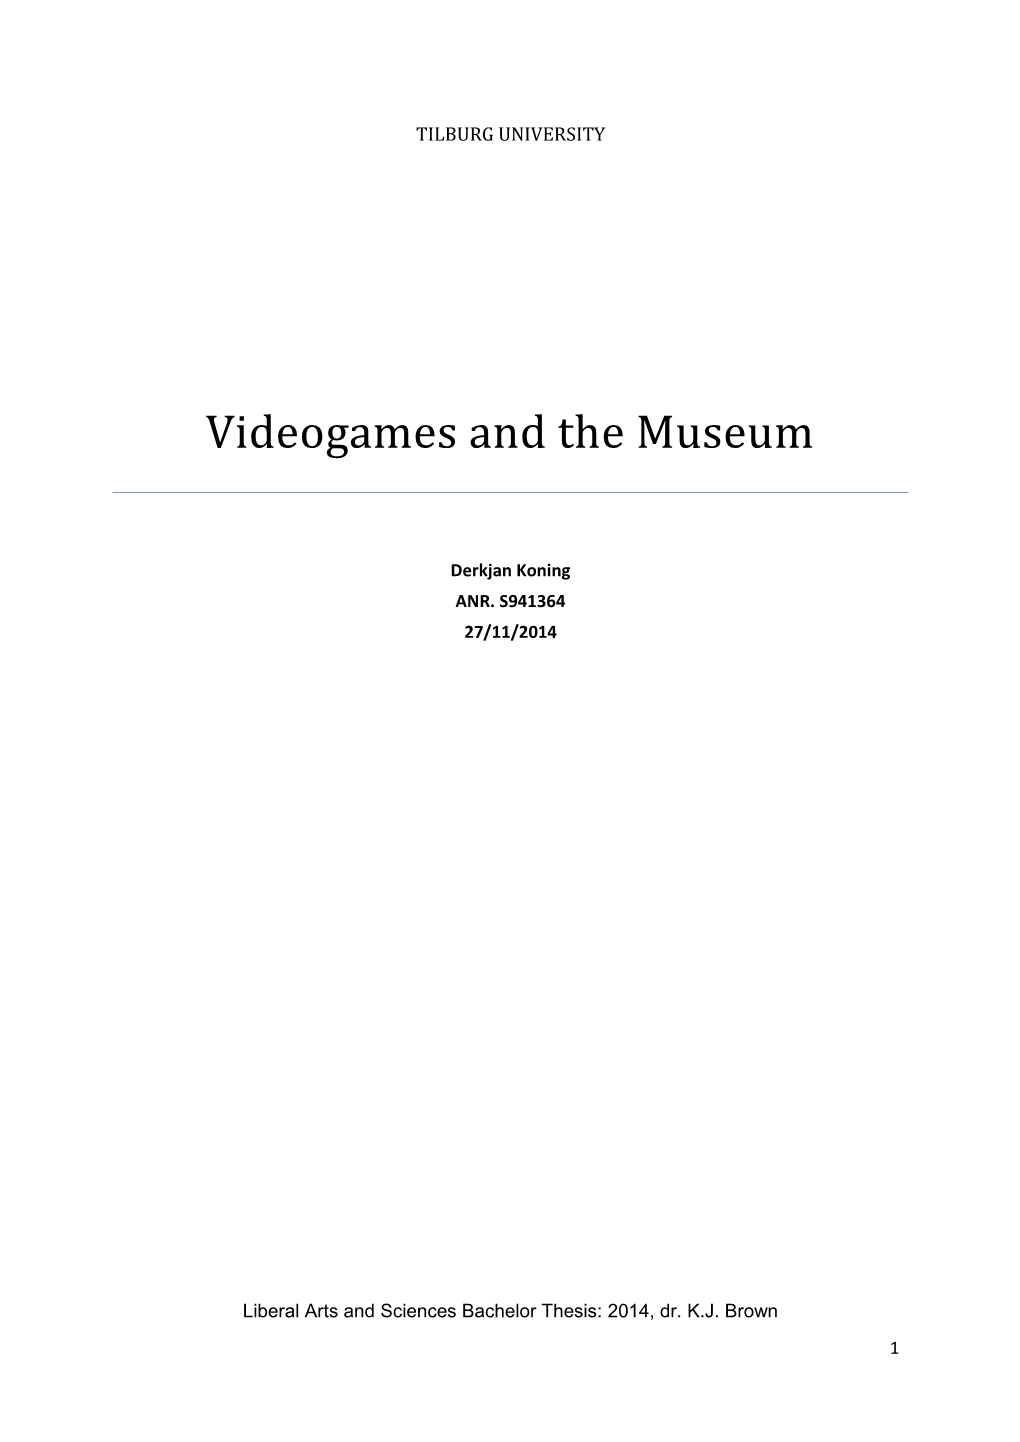 Videogames and the Museum